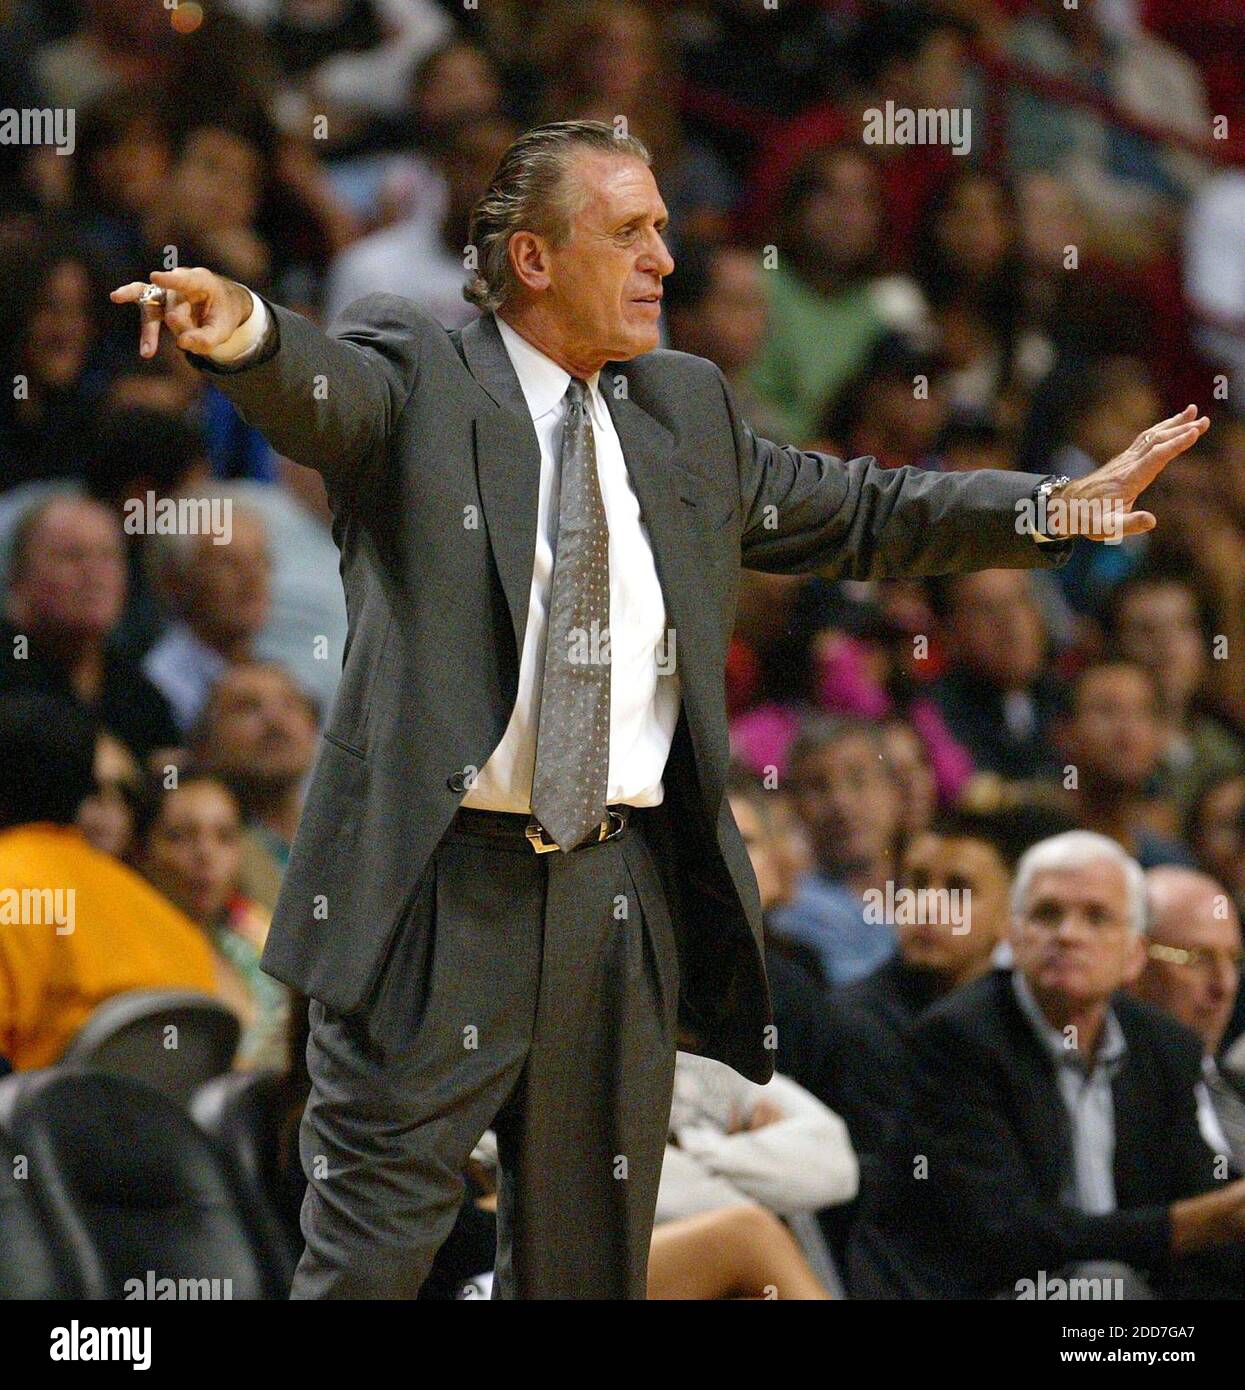 NO FILM, NO VIDEO, NO TV, NO DOCUMENTARY - Miami Heat head coach Pat Riley  gives instructions to his team as they face the Indiana Pacers at the  American Airline Arena in